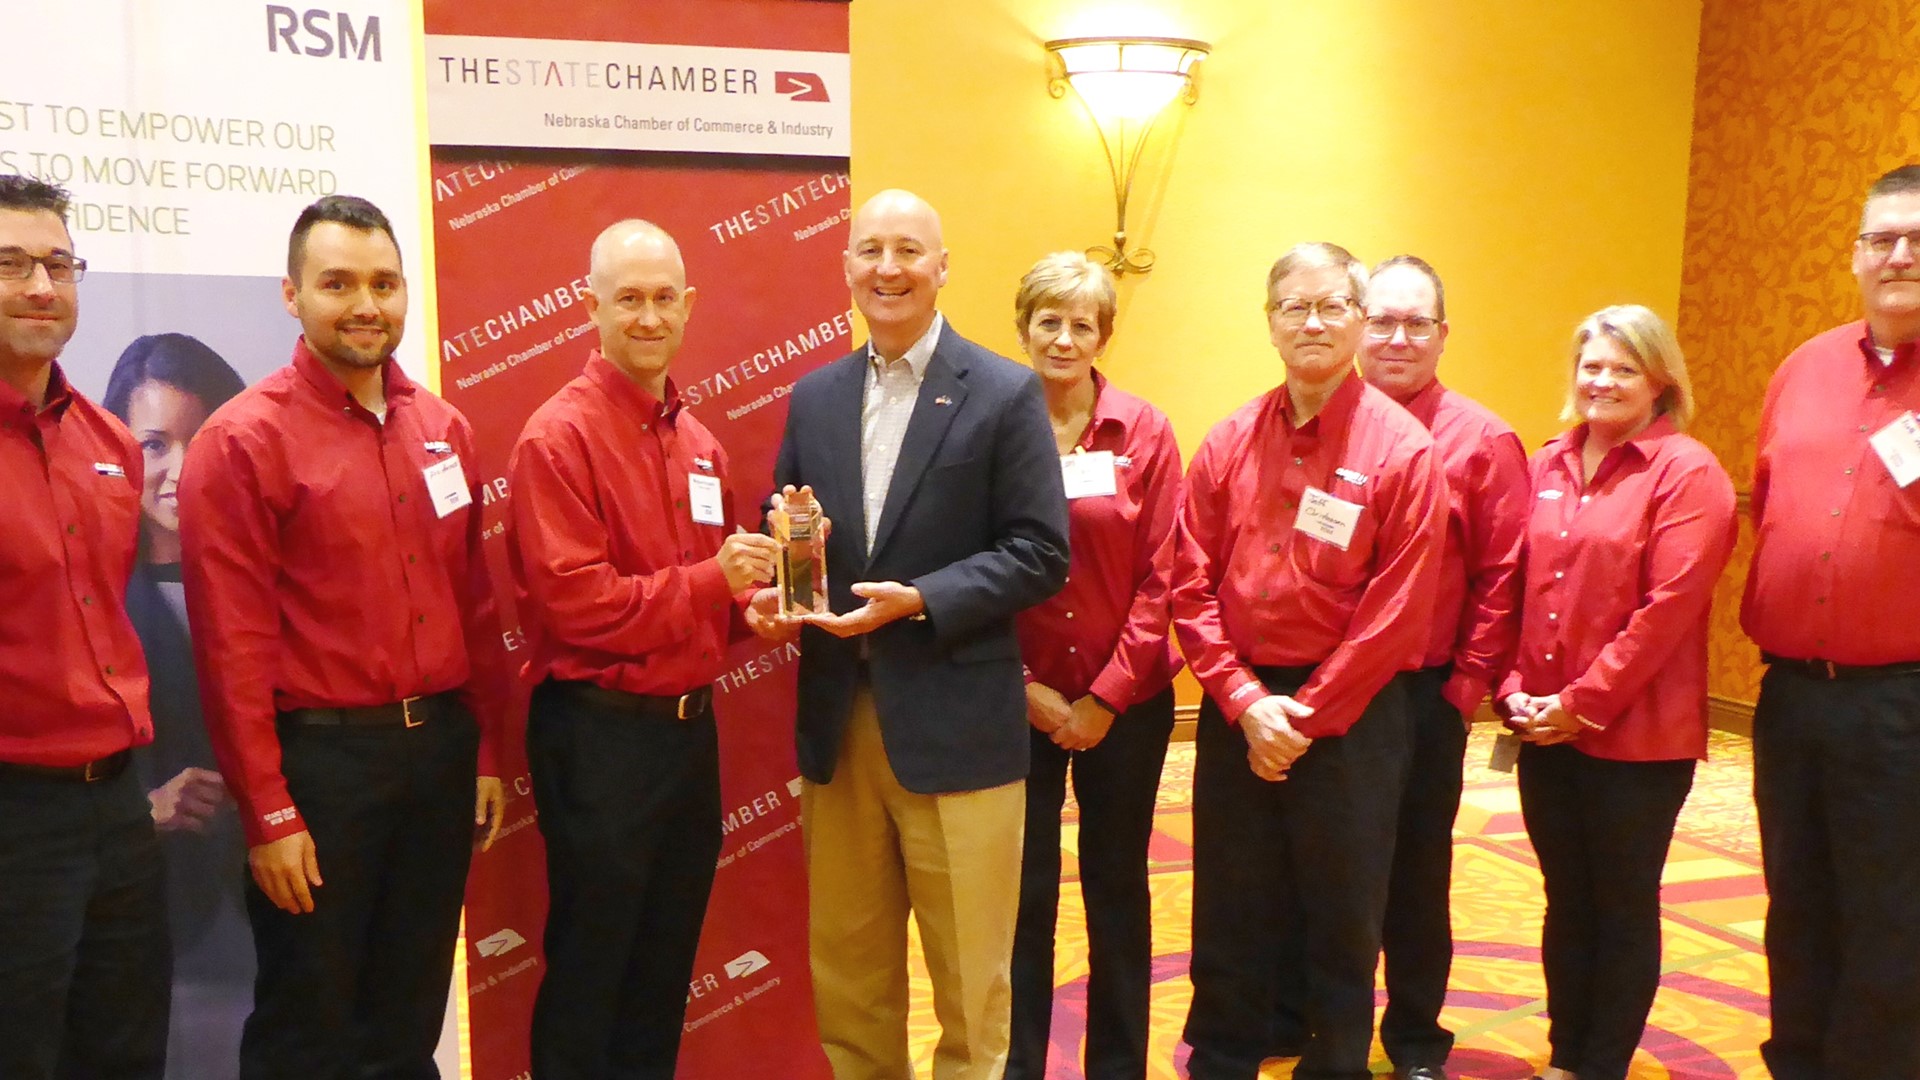 Case IH Grand Island plant named ‘Large Manufacturer of the Year’ by the Nebraska Chamber of Commerce & Industry